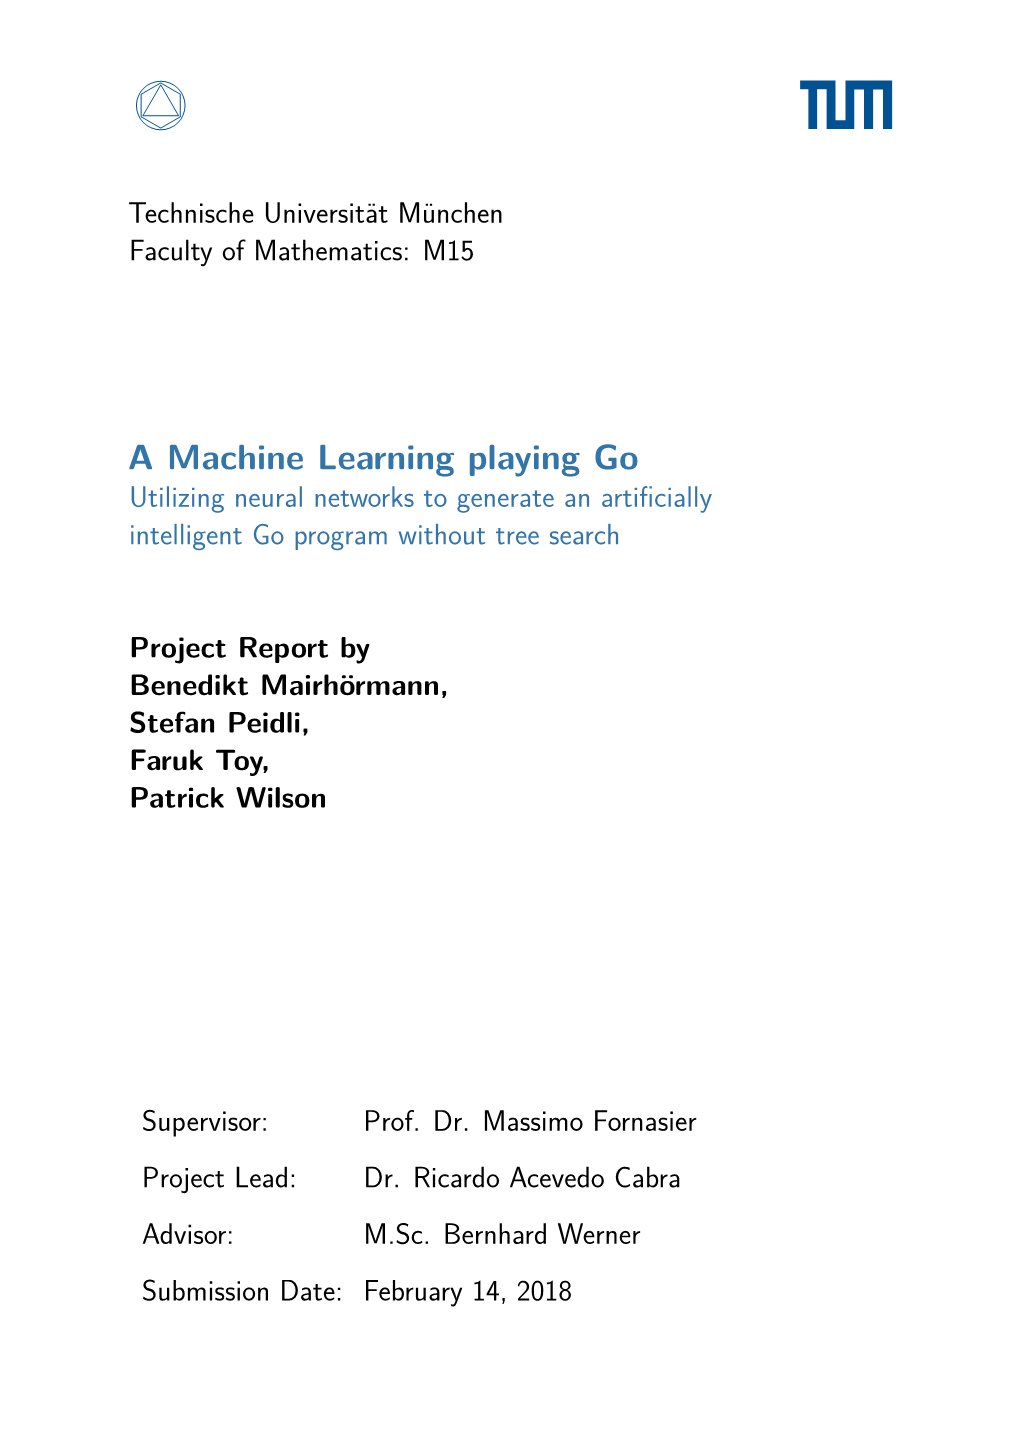 A Machine Learning Playing Go Utilizing Neural Networks to Generate an Artiﬁcially Intelligent Go Program Without Tree Search